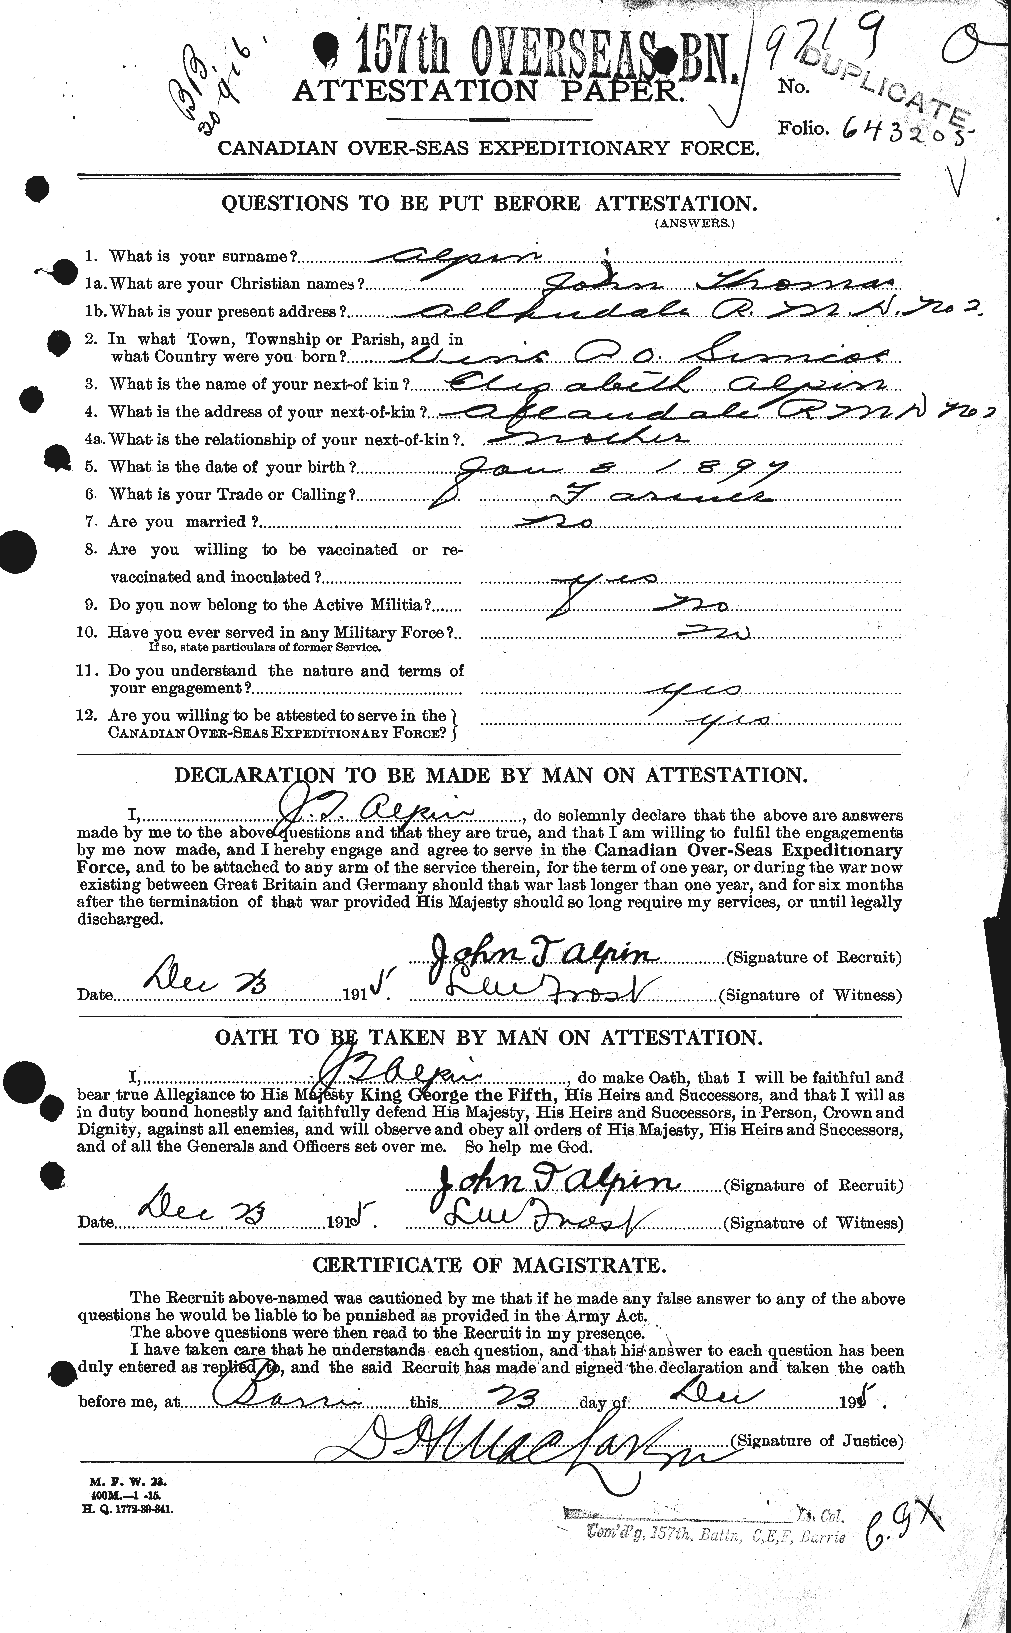 Personnel Records of the First World War - CEF 208203a